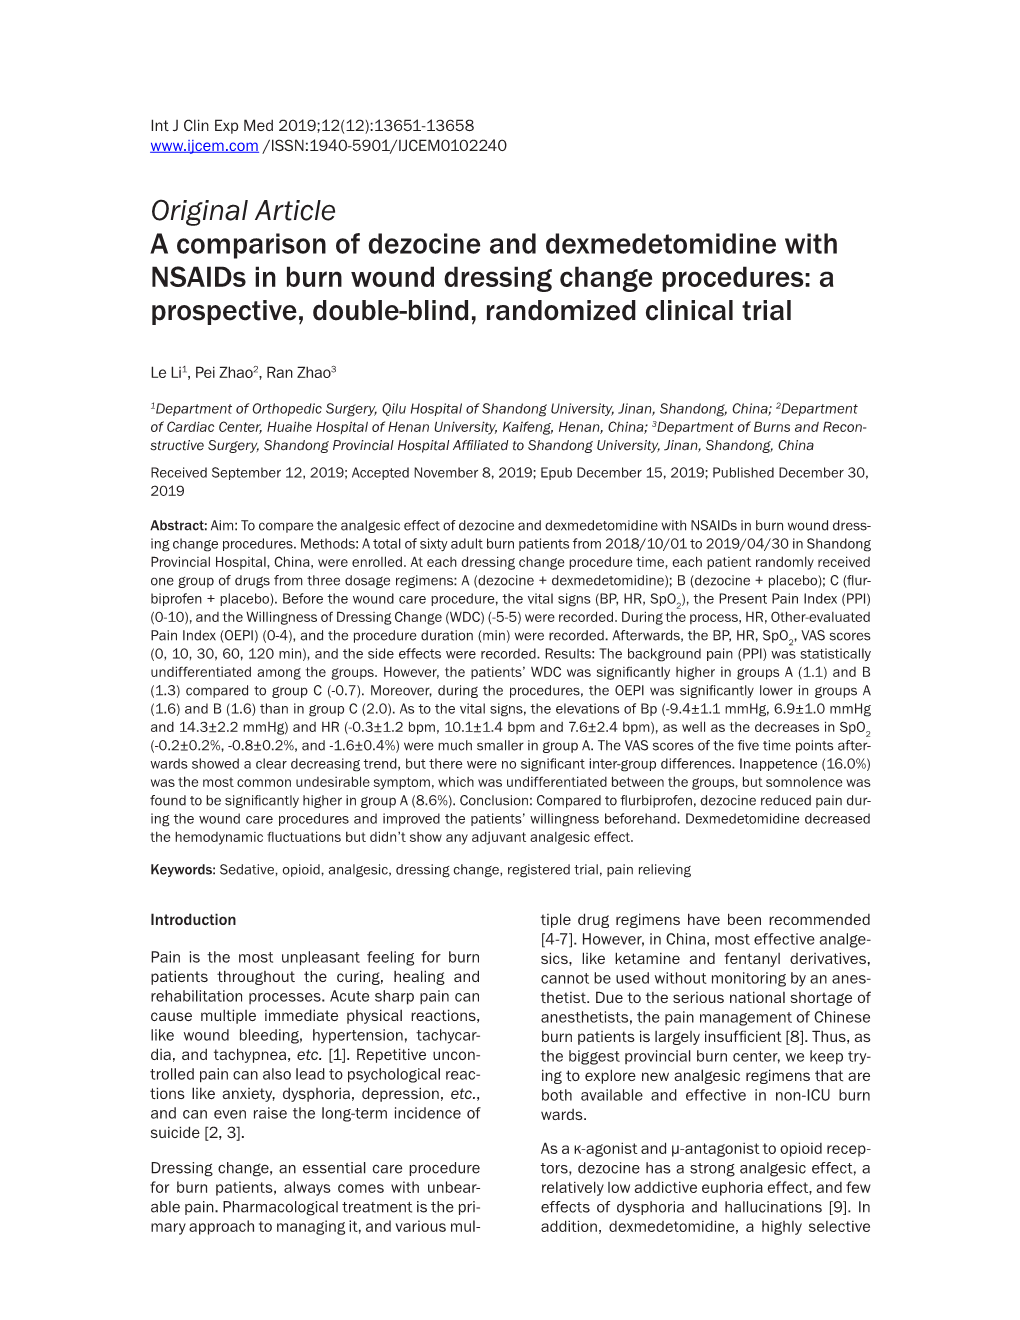 Original Article a Comparison of Dezocine and Dexmedetomidine with Nsaids in Burn Wound Dressing Change Procedures: a Prospectiv